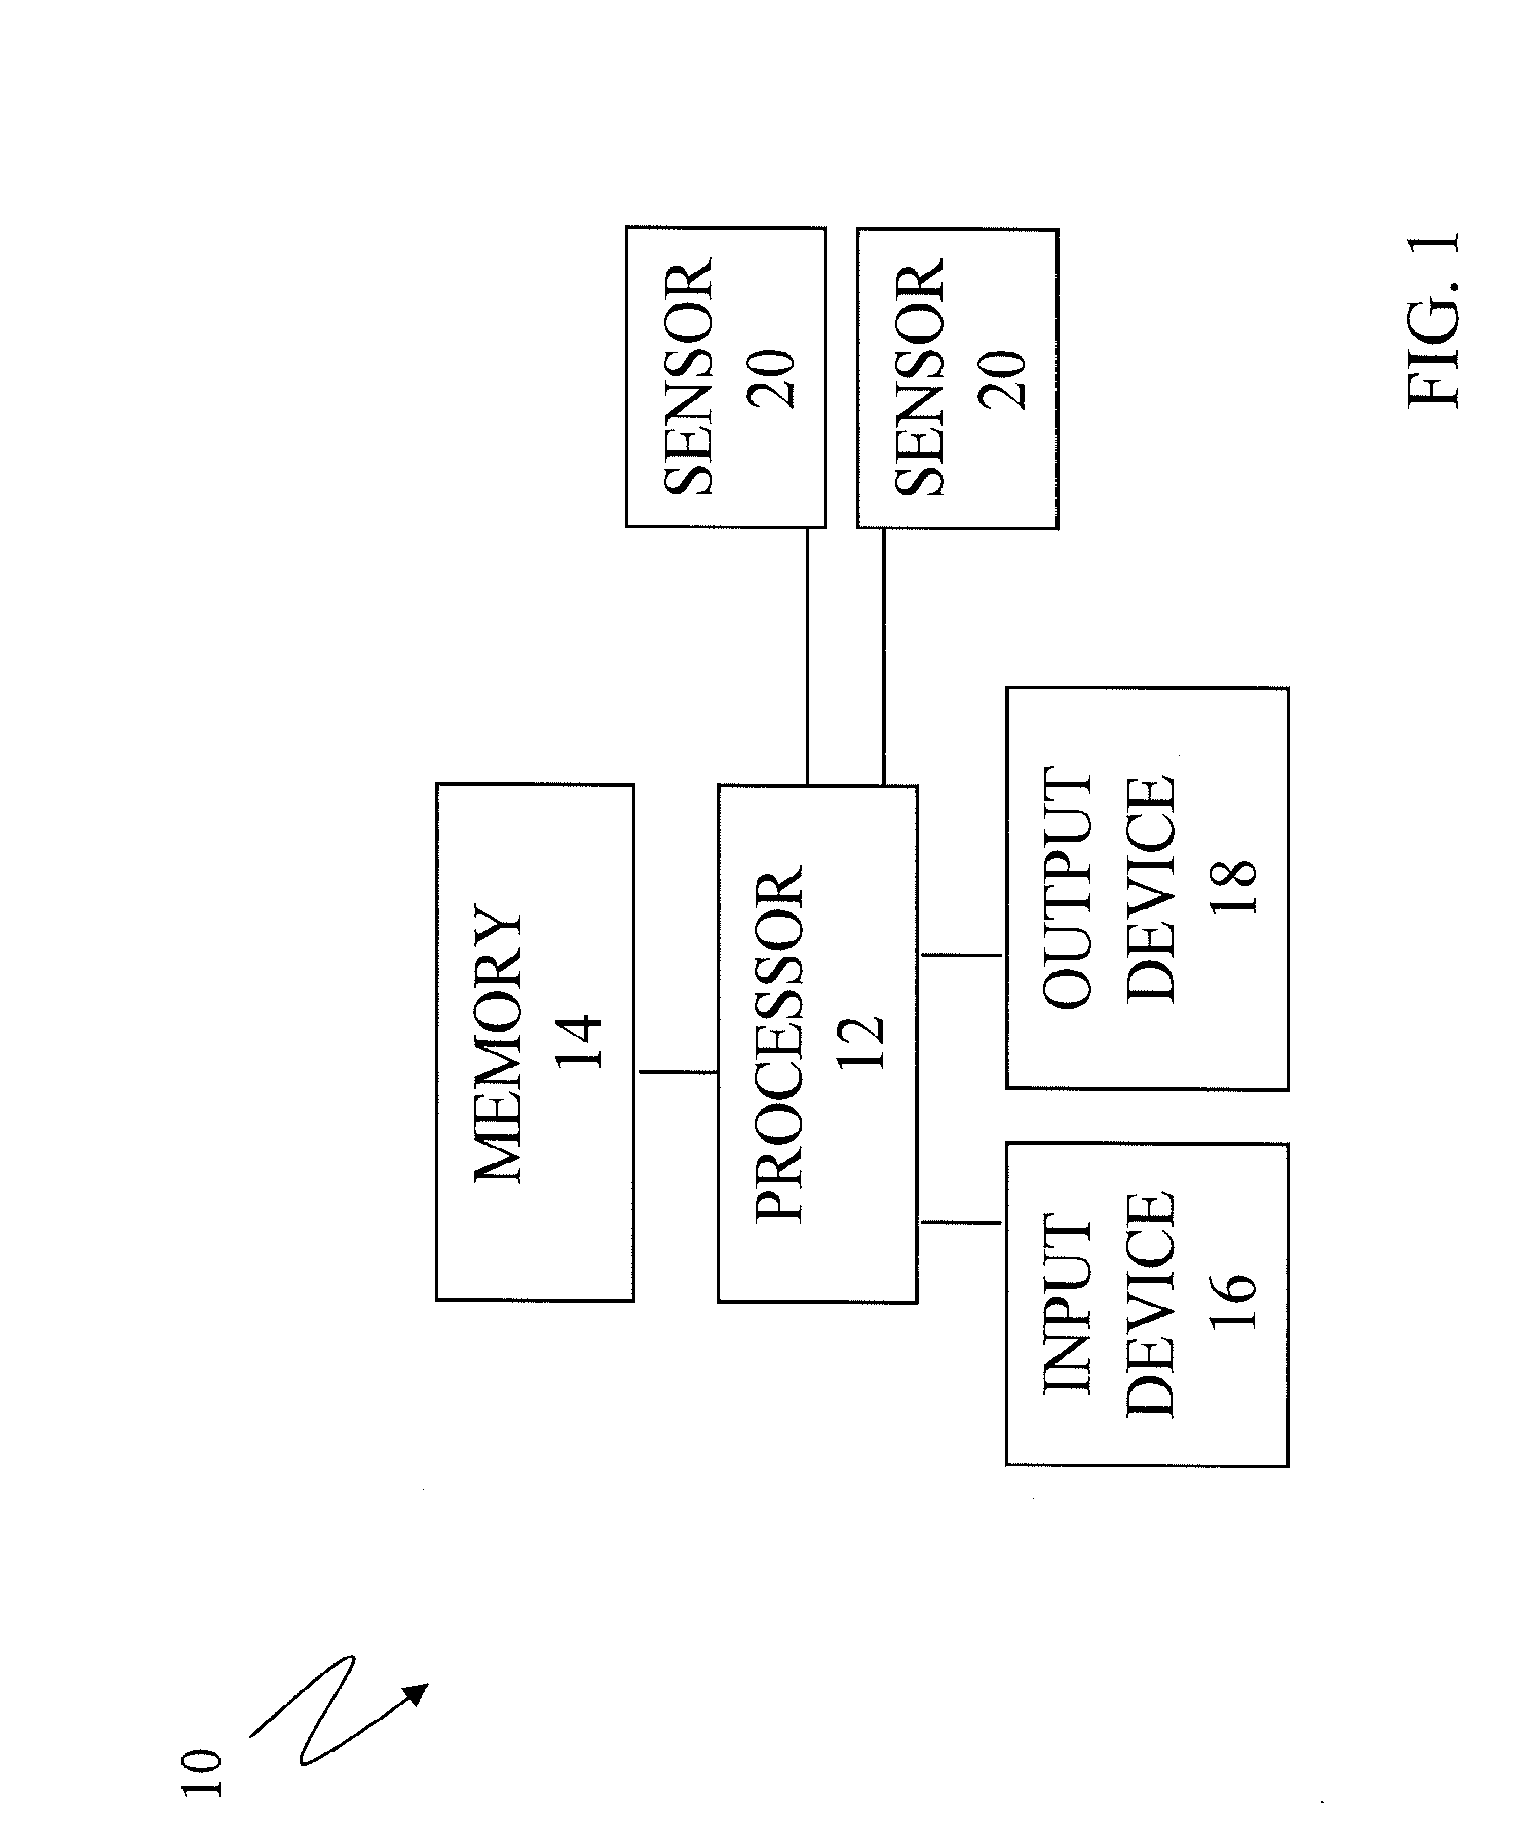 Methods and Apparatuses for Monitoring Energy Consumption and Related Operations